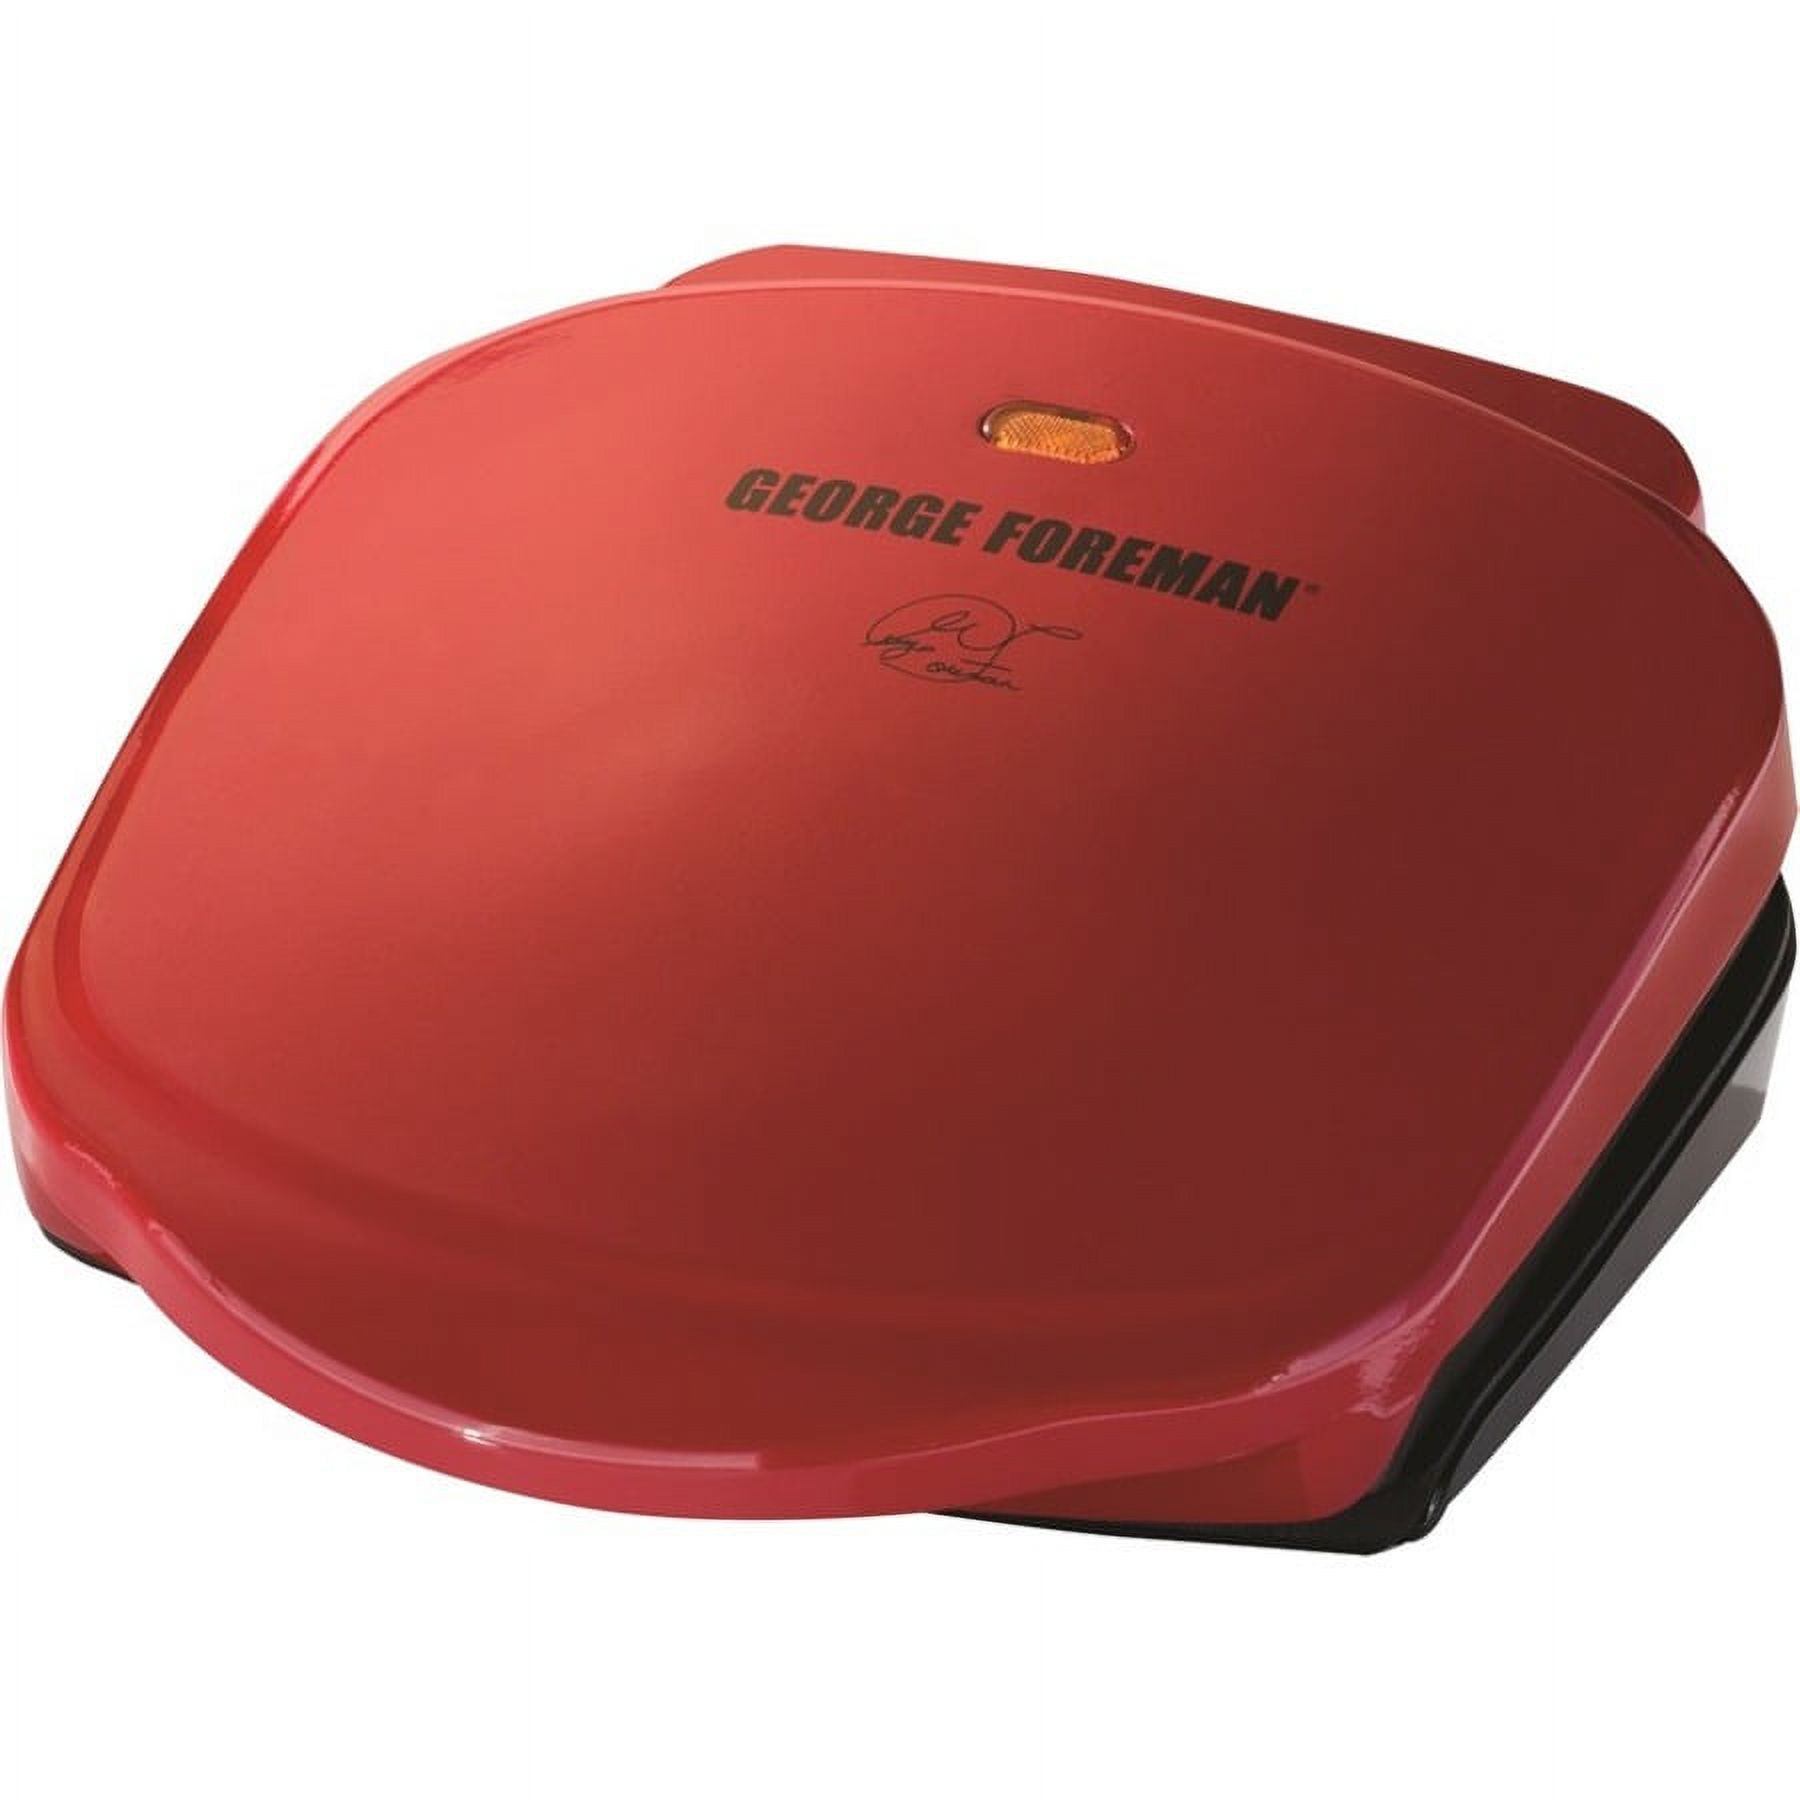 George Foreman 2-Serving Classic Plate Electric Indoor Grill and Panini Press, Red, GR10RM - image 4 of 11